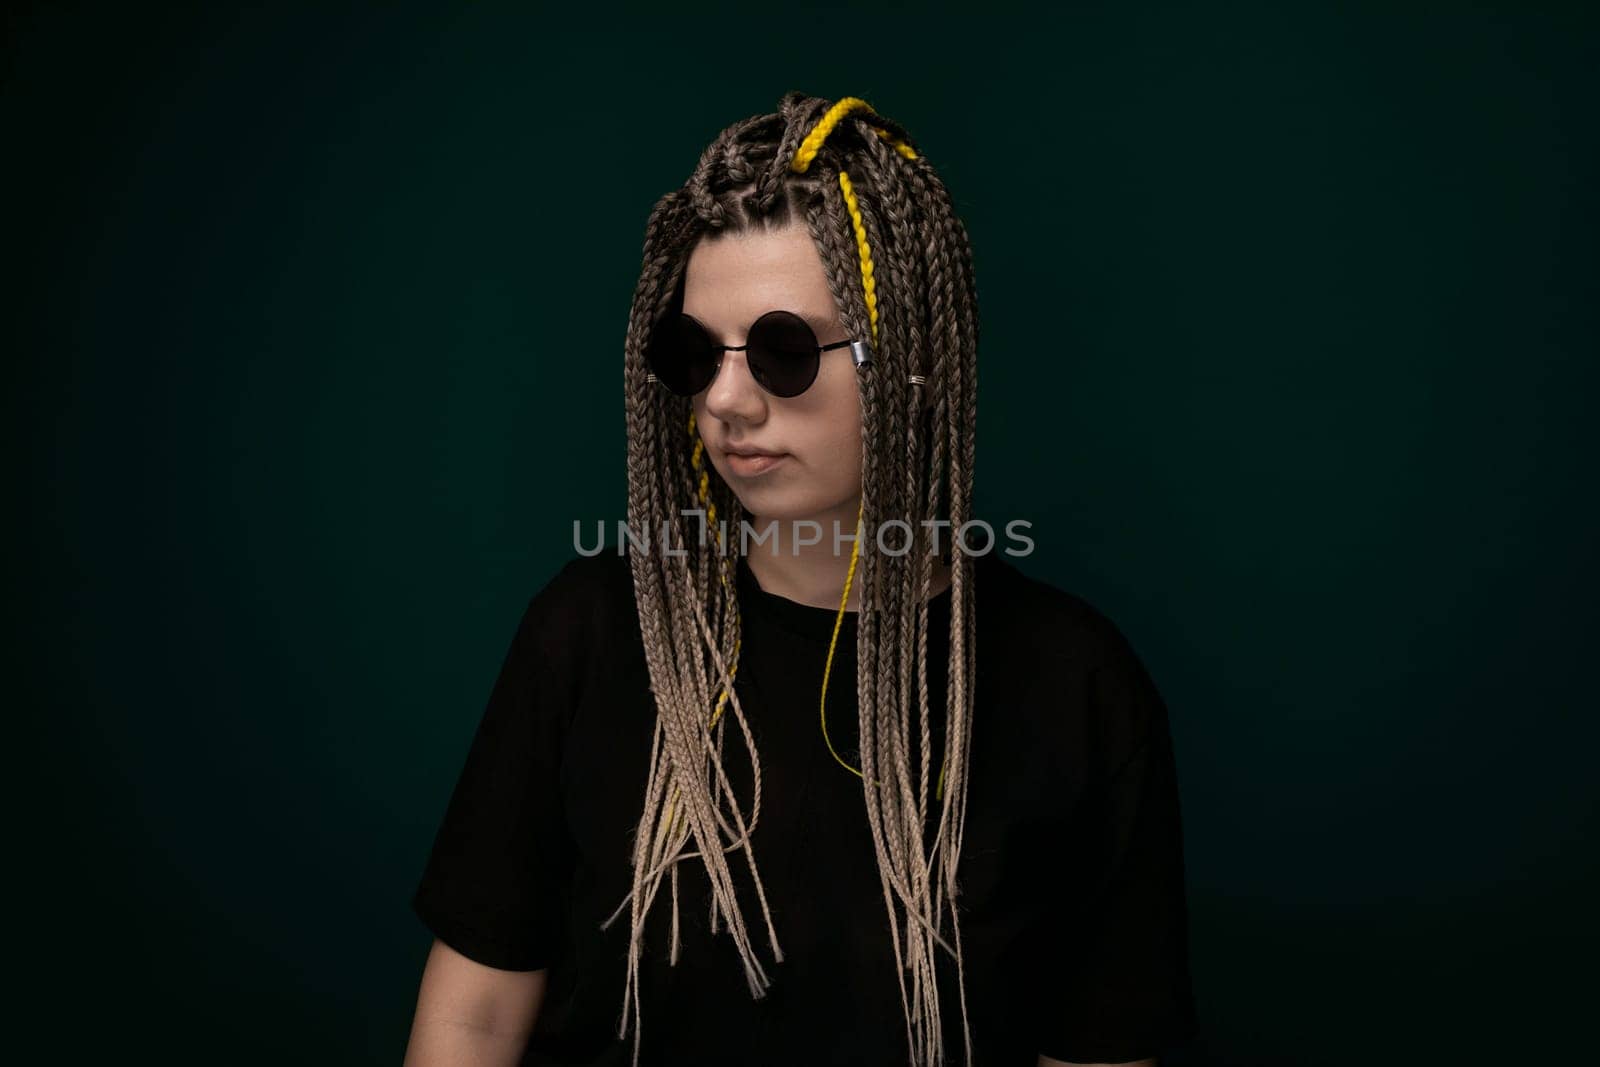 A woman with dreadlocks is seen wearing a black shirt, looking directly at the camera in a neutral pose. Her dreadlocks are styled neatly and fall down her shoulders. She appears confident and poised.